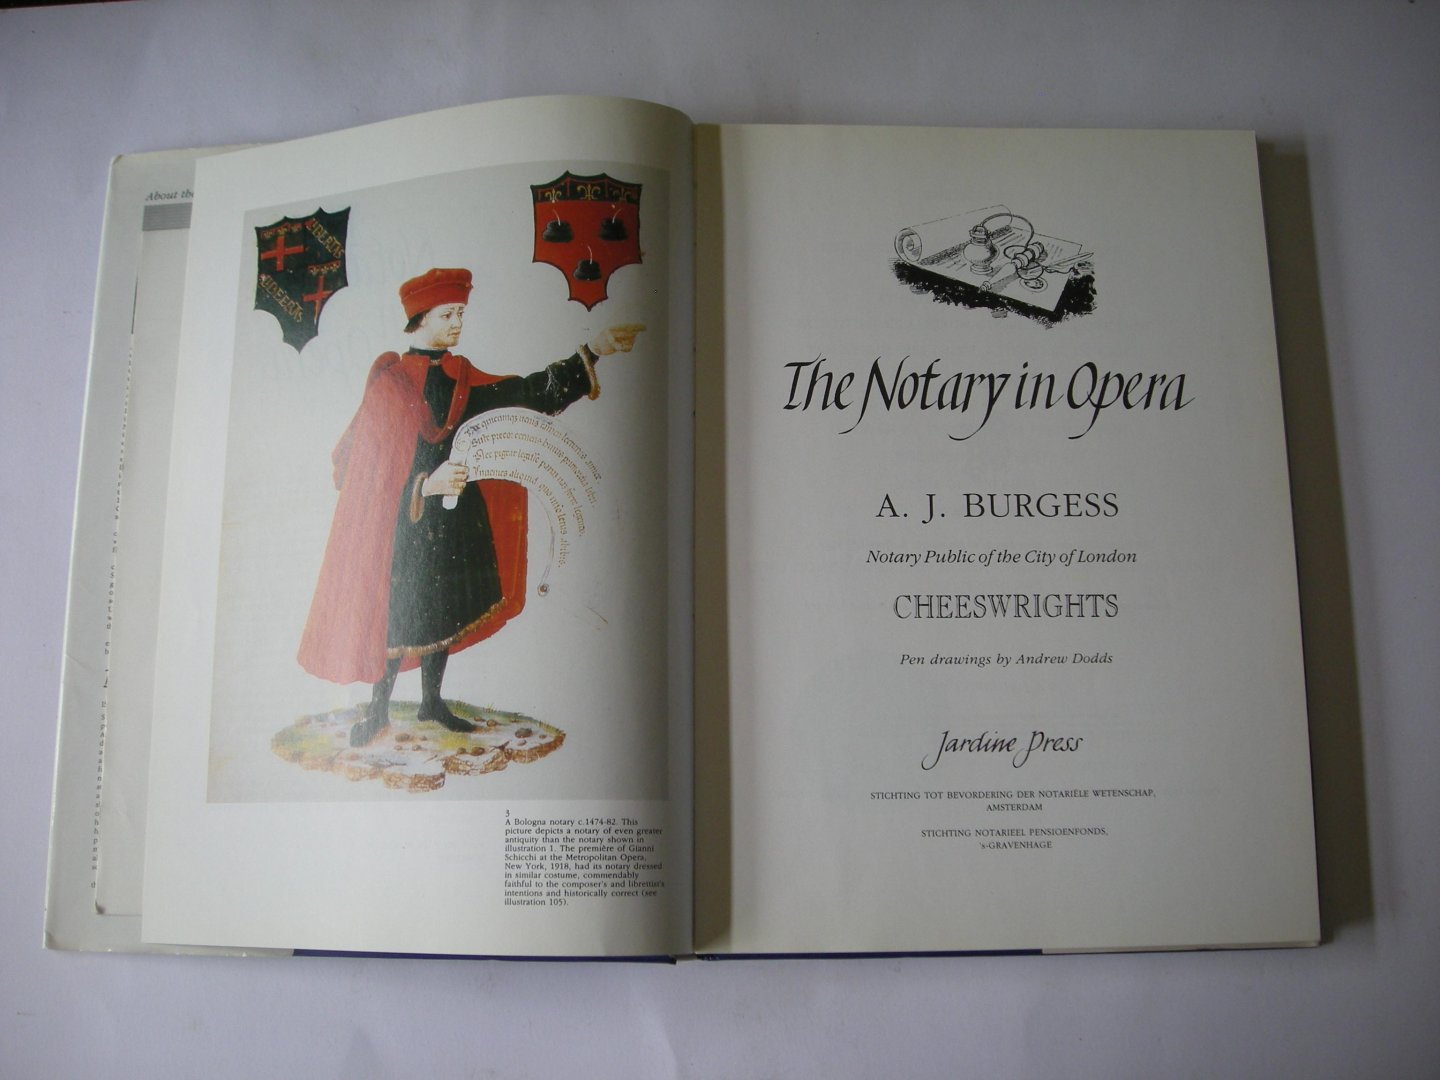 Burgess, A.J., Notary Public of the City of London, Cheeswrights / Dodds, Andrew, pen drawings - The Notary in Opera (Catalogus tentoonstelling 1976, Rijksmuseum De notaris in de kunst/Le Notaire dans l'art, 10 pp. ingelegd0